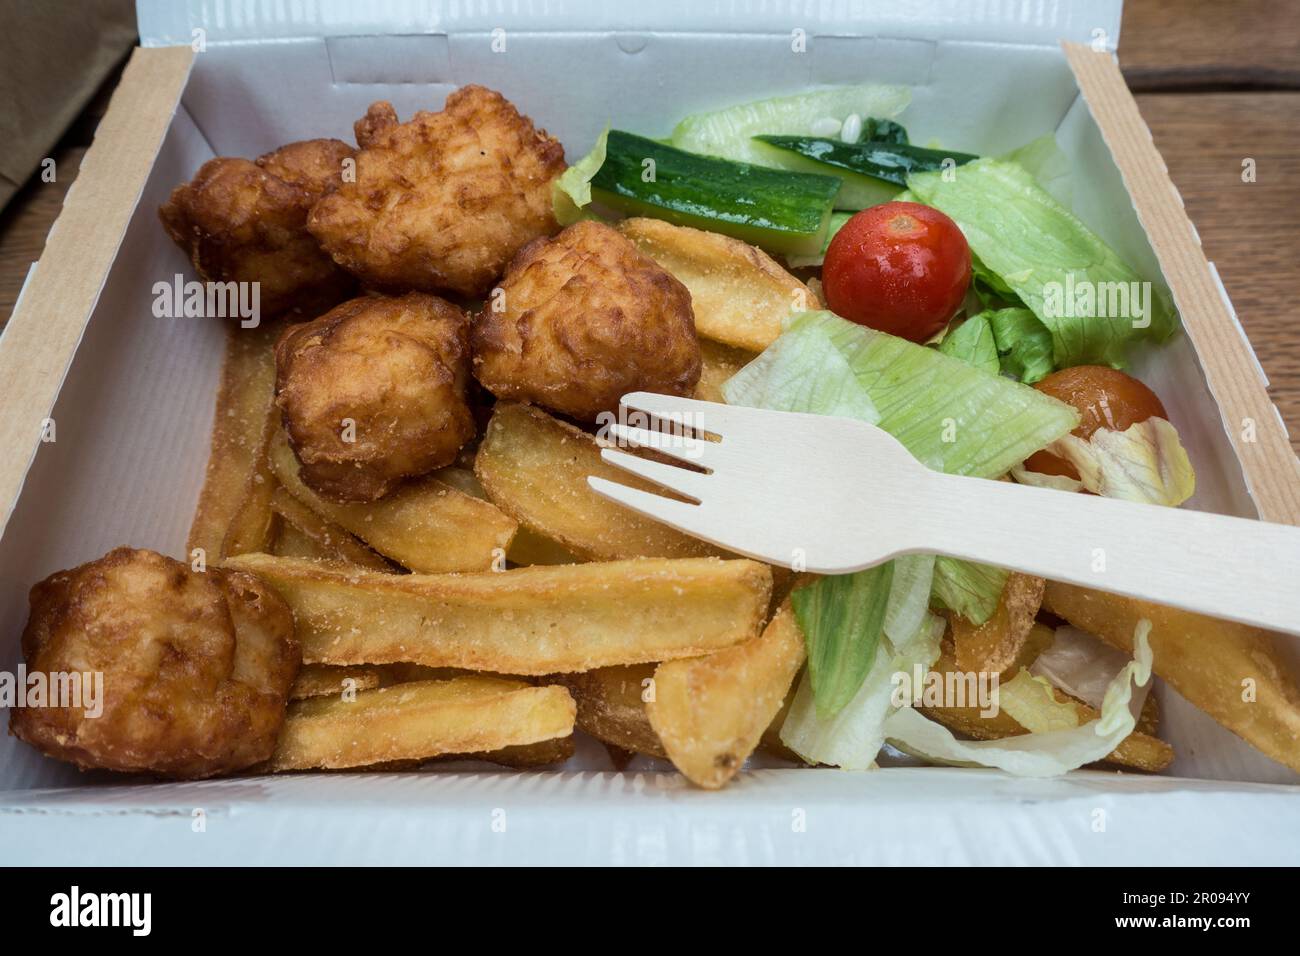 Children chicken nuggets meals in a box with wooden fork Stock Photo